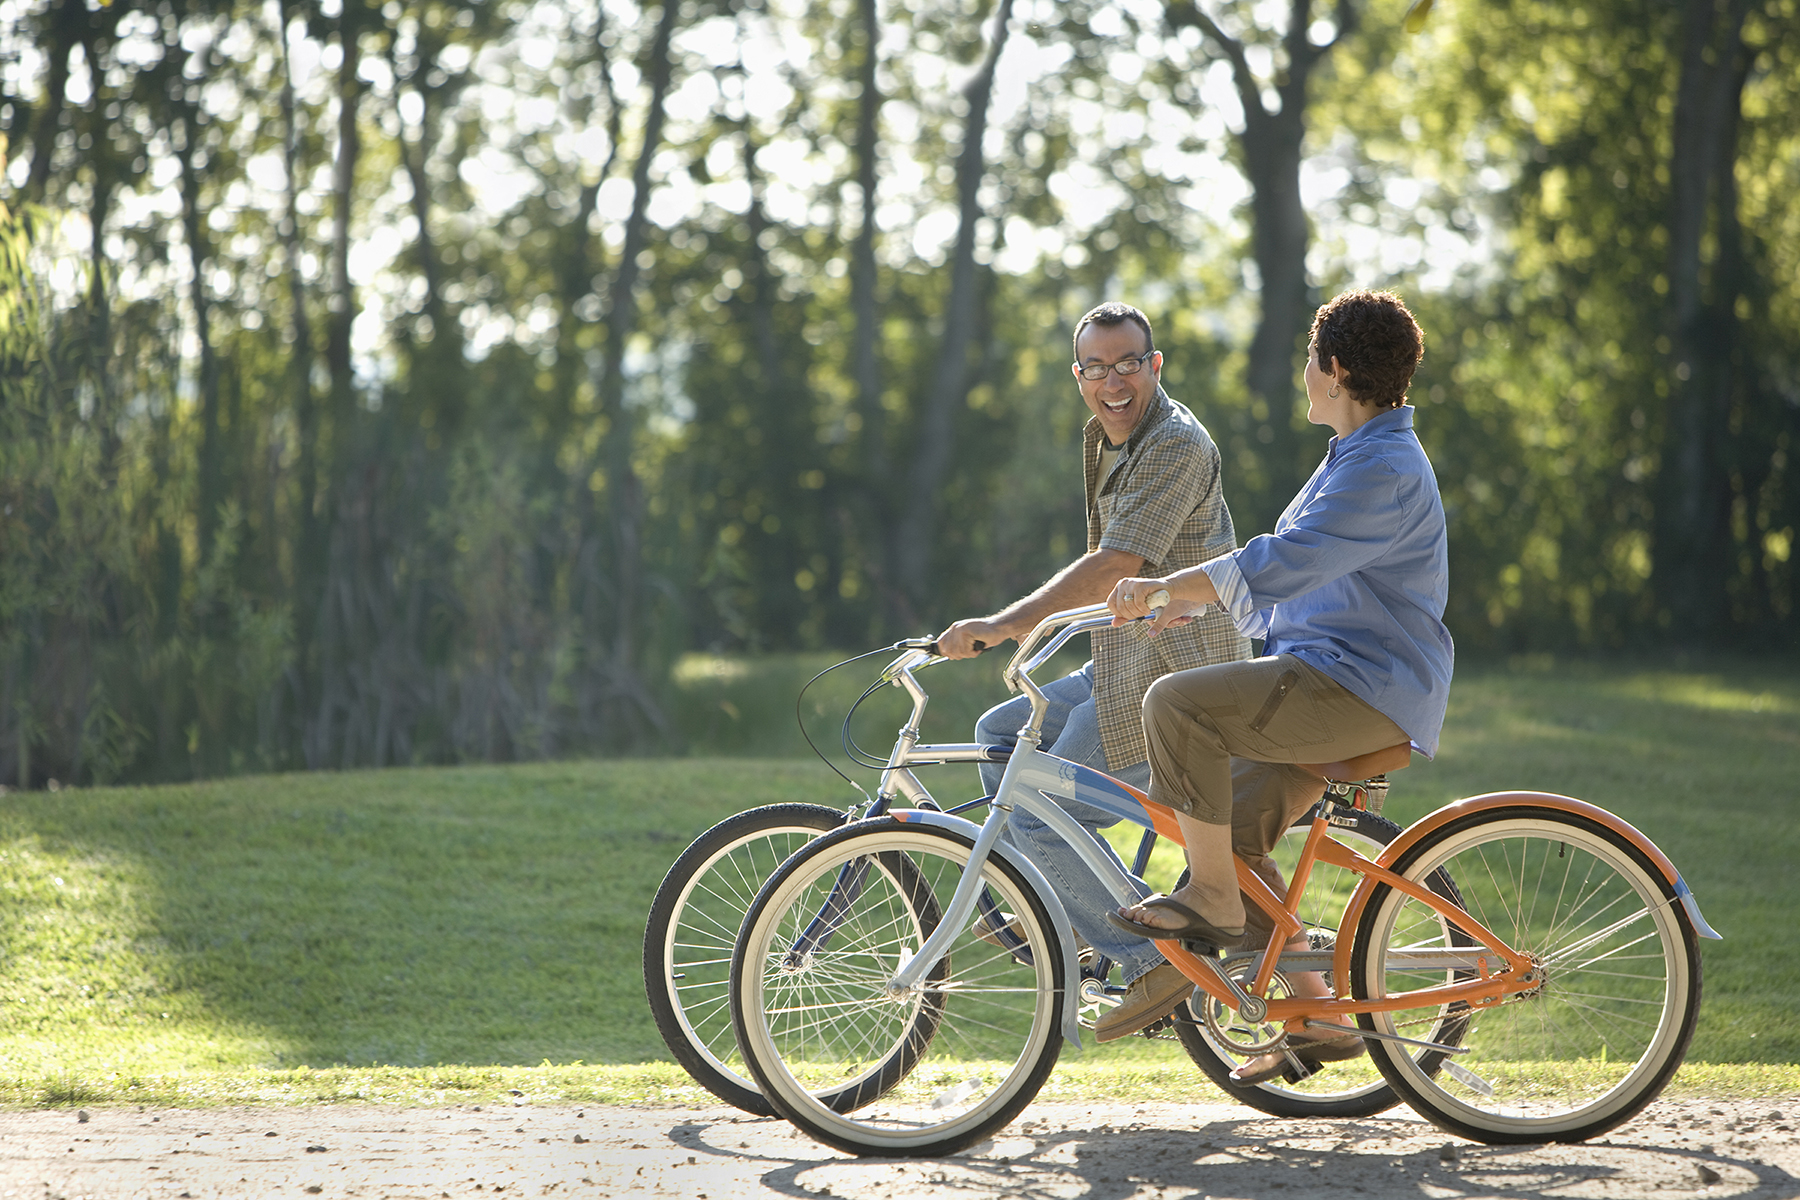 This is an image of a smiling couple riding bikes through a park